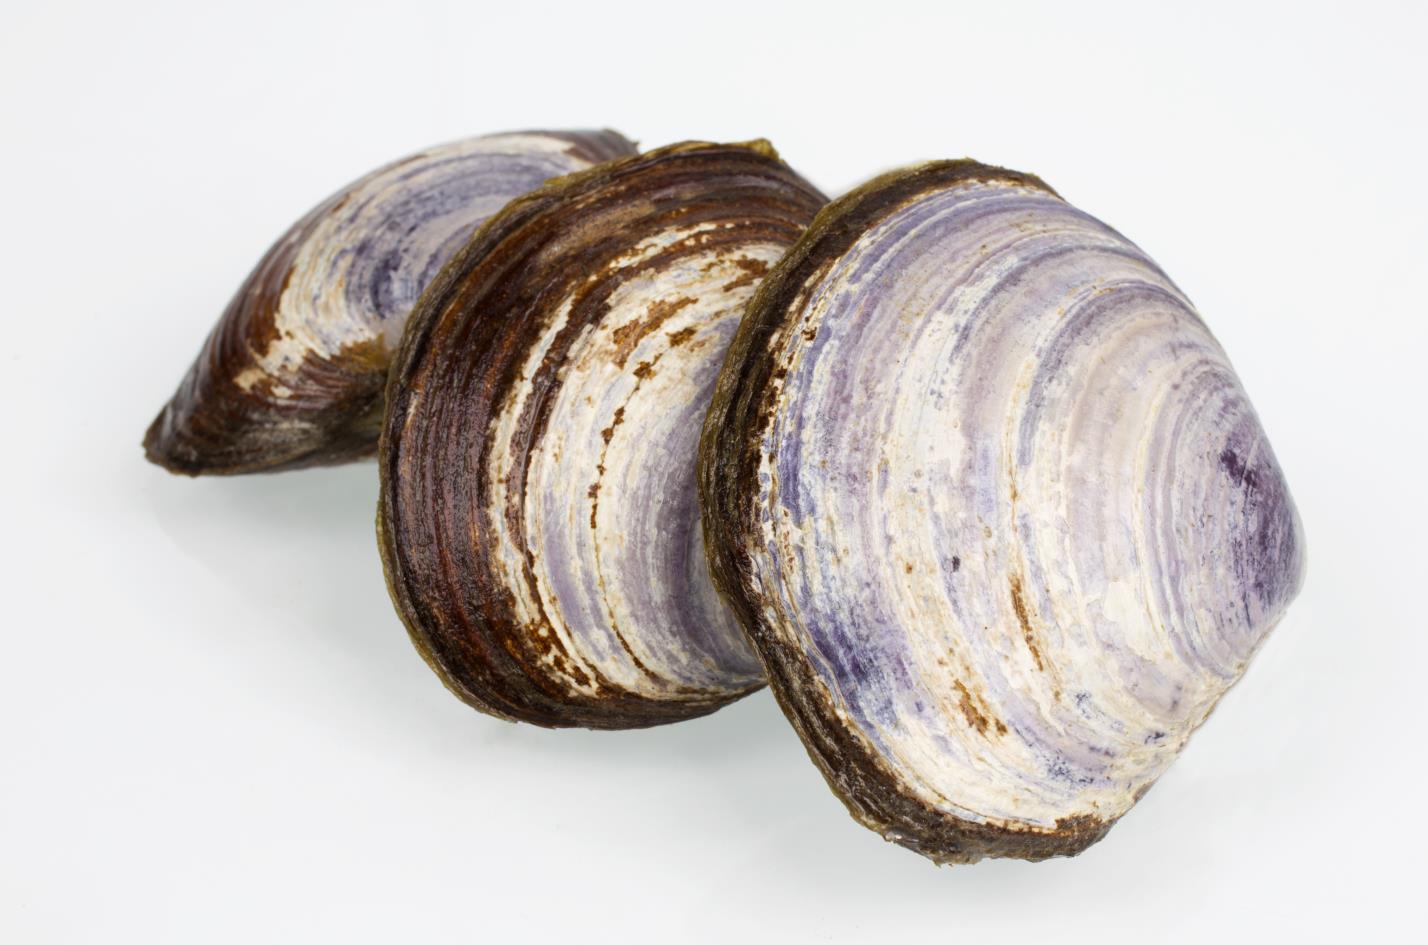 Delicious Savoury Clams are one of over 500 Ocean Wise recommended products available from Seacore Seafood Inc. Credit: Seacore Seafood Inc.